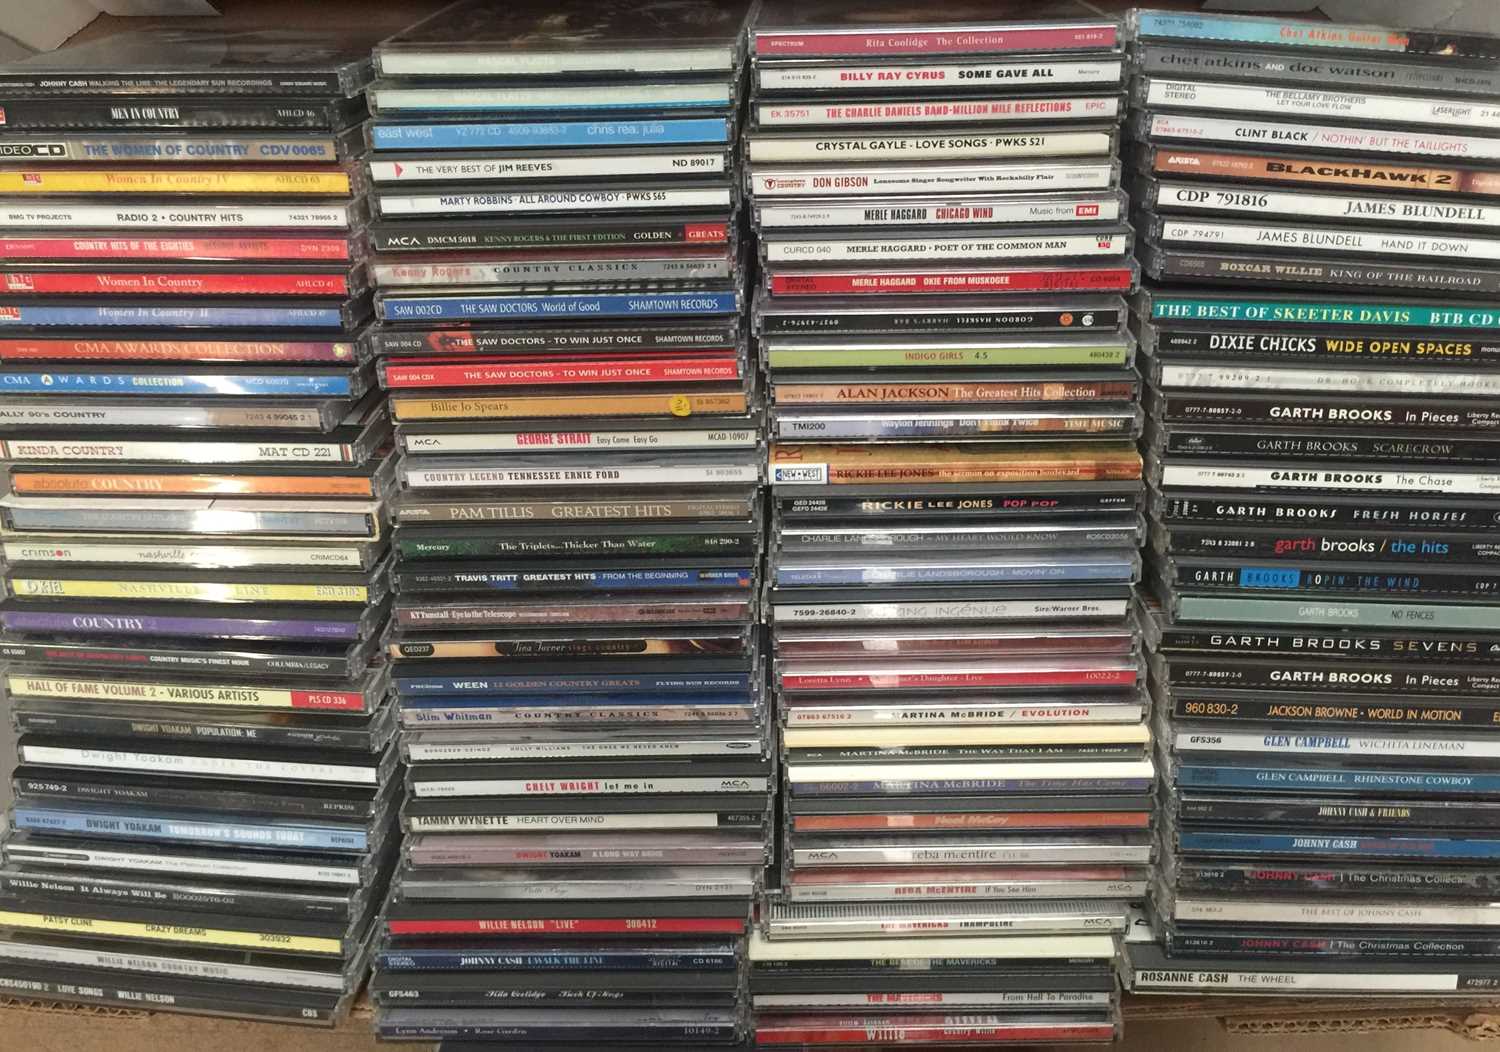 Murfie stored thousands of customers' CDs, then suddenly disappeared - The  Verge